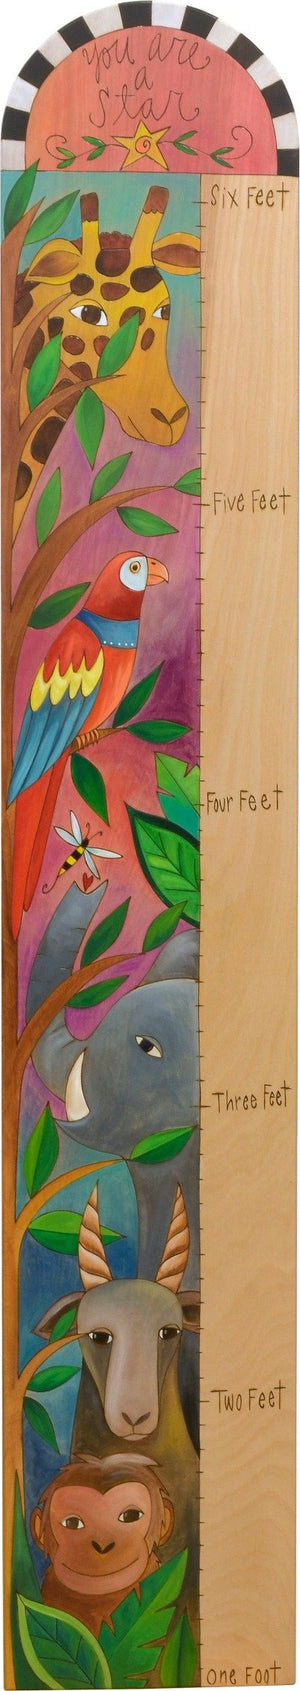 Everlasting Growth Chart –  A bright safari themed growth chart for your kiddo's room